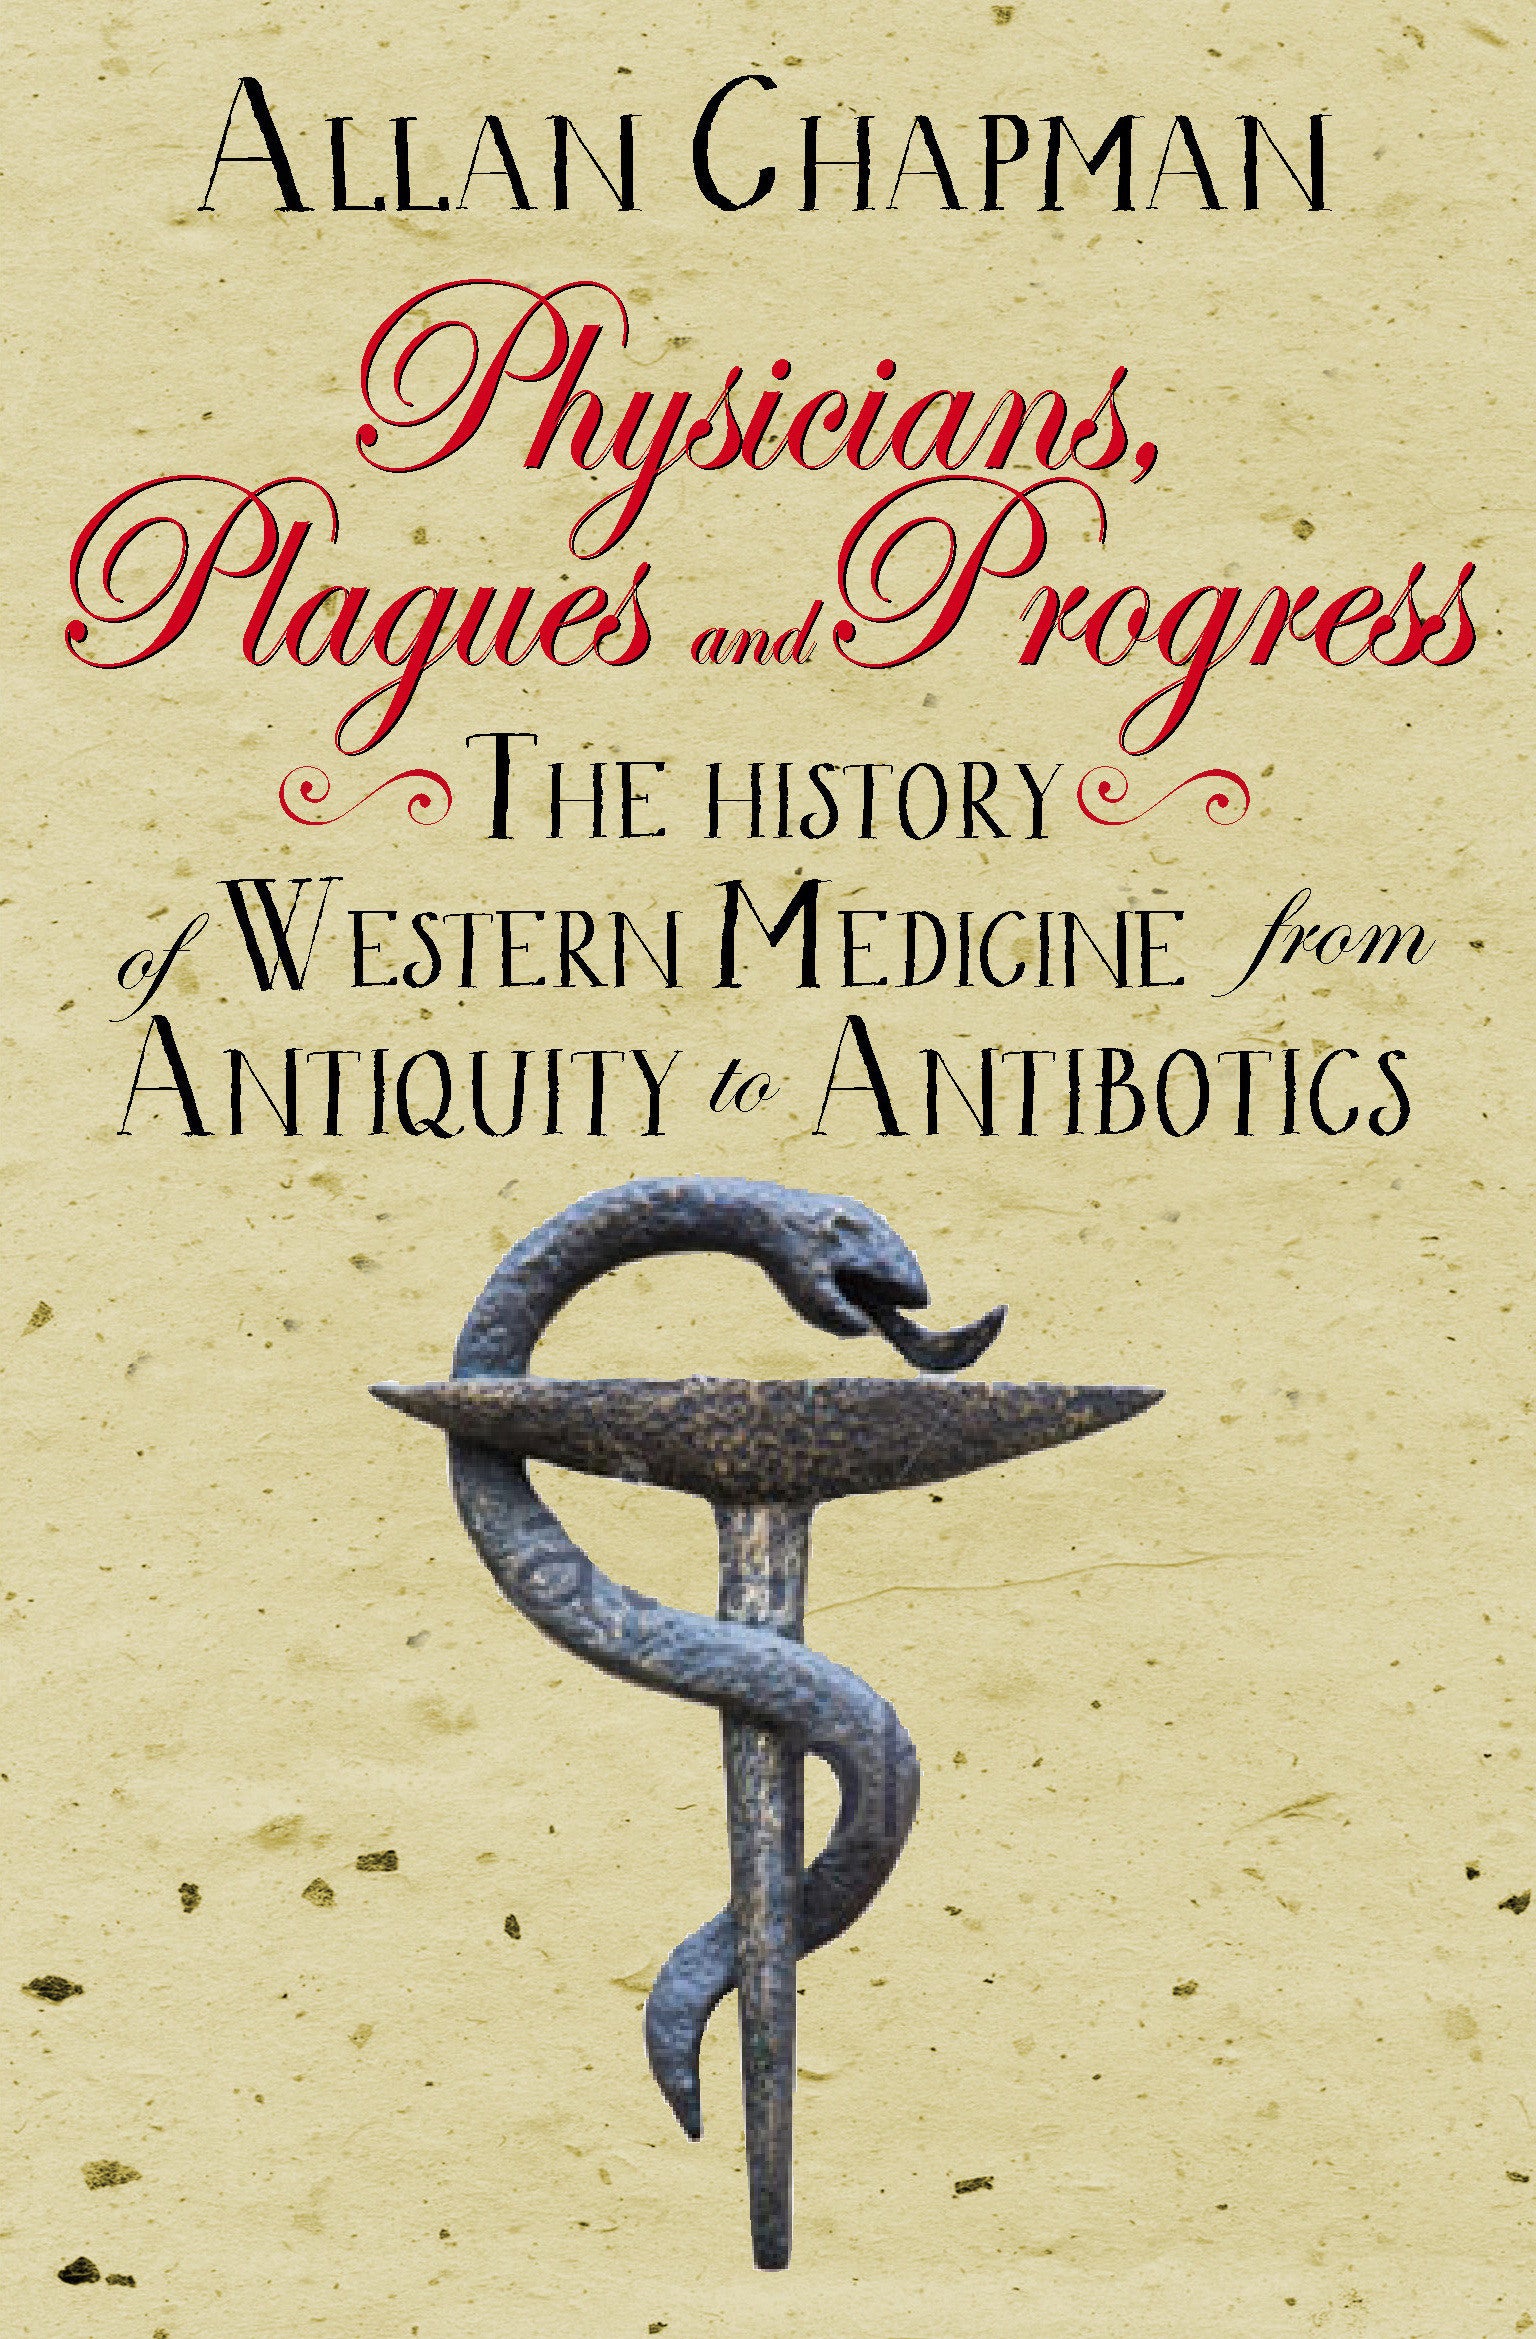 Image of Physicians, plagues and progress other